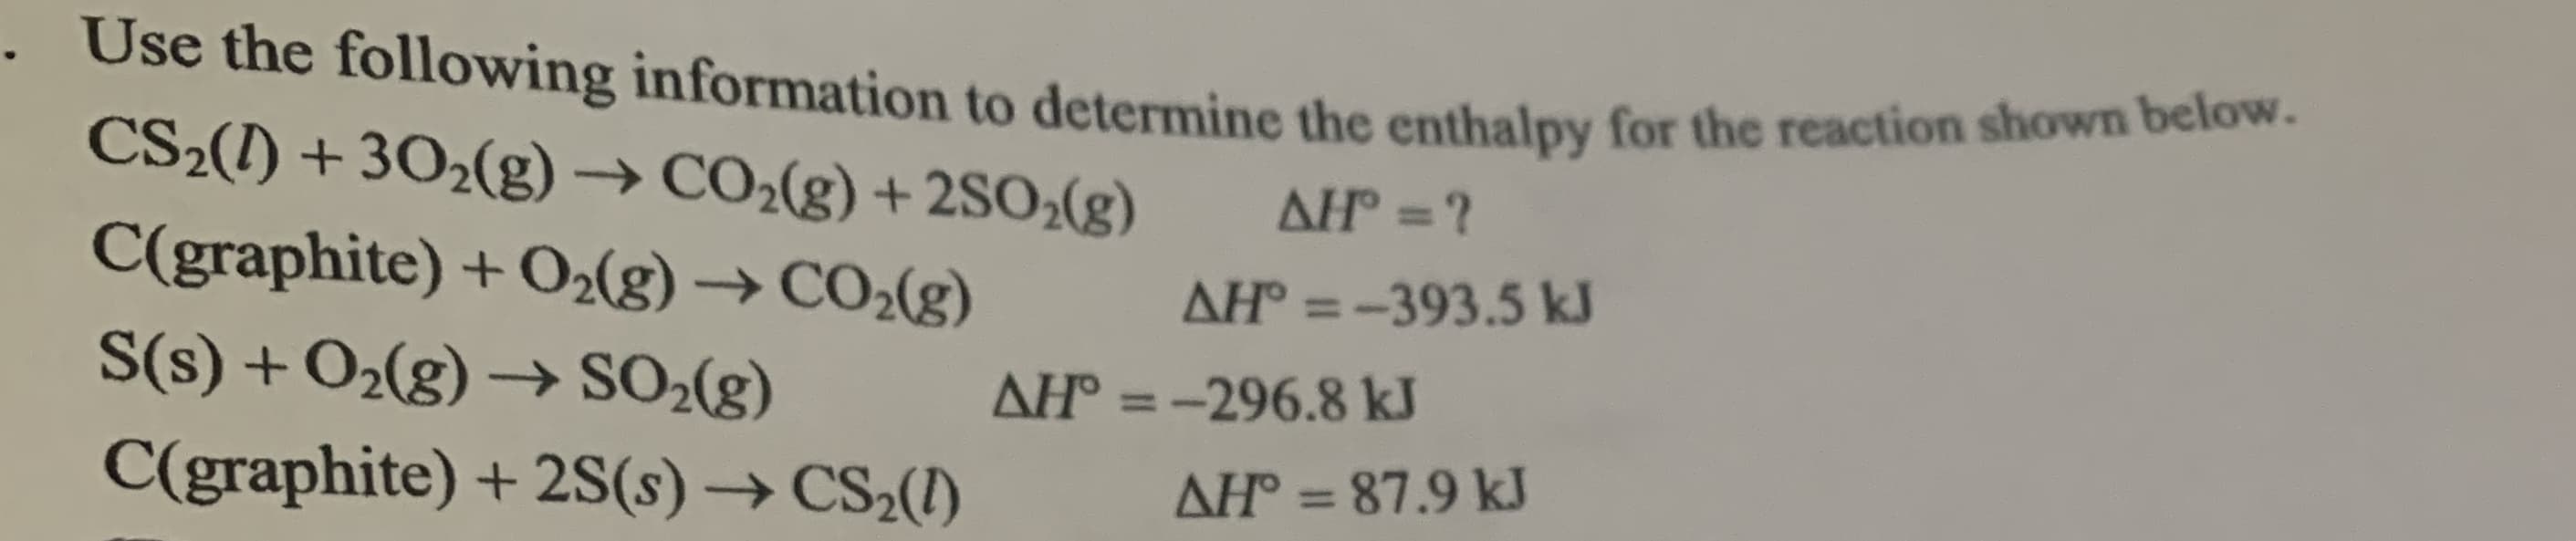 Use the following information to determine the enthalpy for the reaction shown below
CS2(1) + 302(g) → CO2(g) + 2SO;(g)
AH =?
C(graphite) +O2(g) → CO2(g)
AH° = -393.5 kJ
%3D
S(s) + O2(g) → SO2(g)
AH = -296.8 kJ
%3D
C(graphite) + 2S(s) → CS2(1)
AH = 87.9 kJ
%3D
